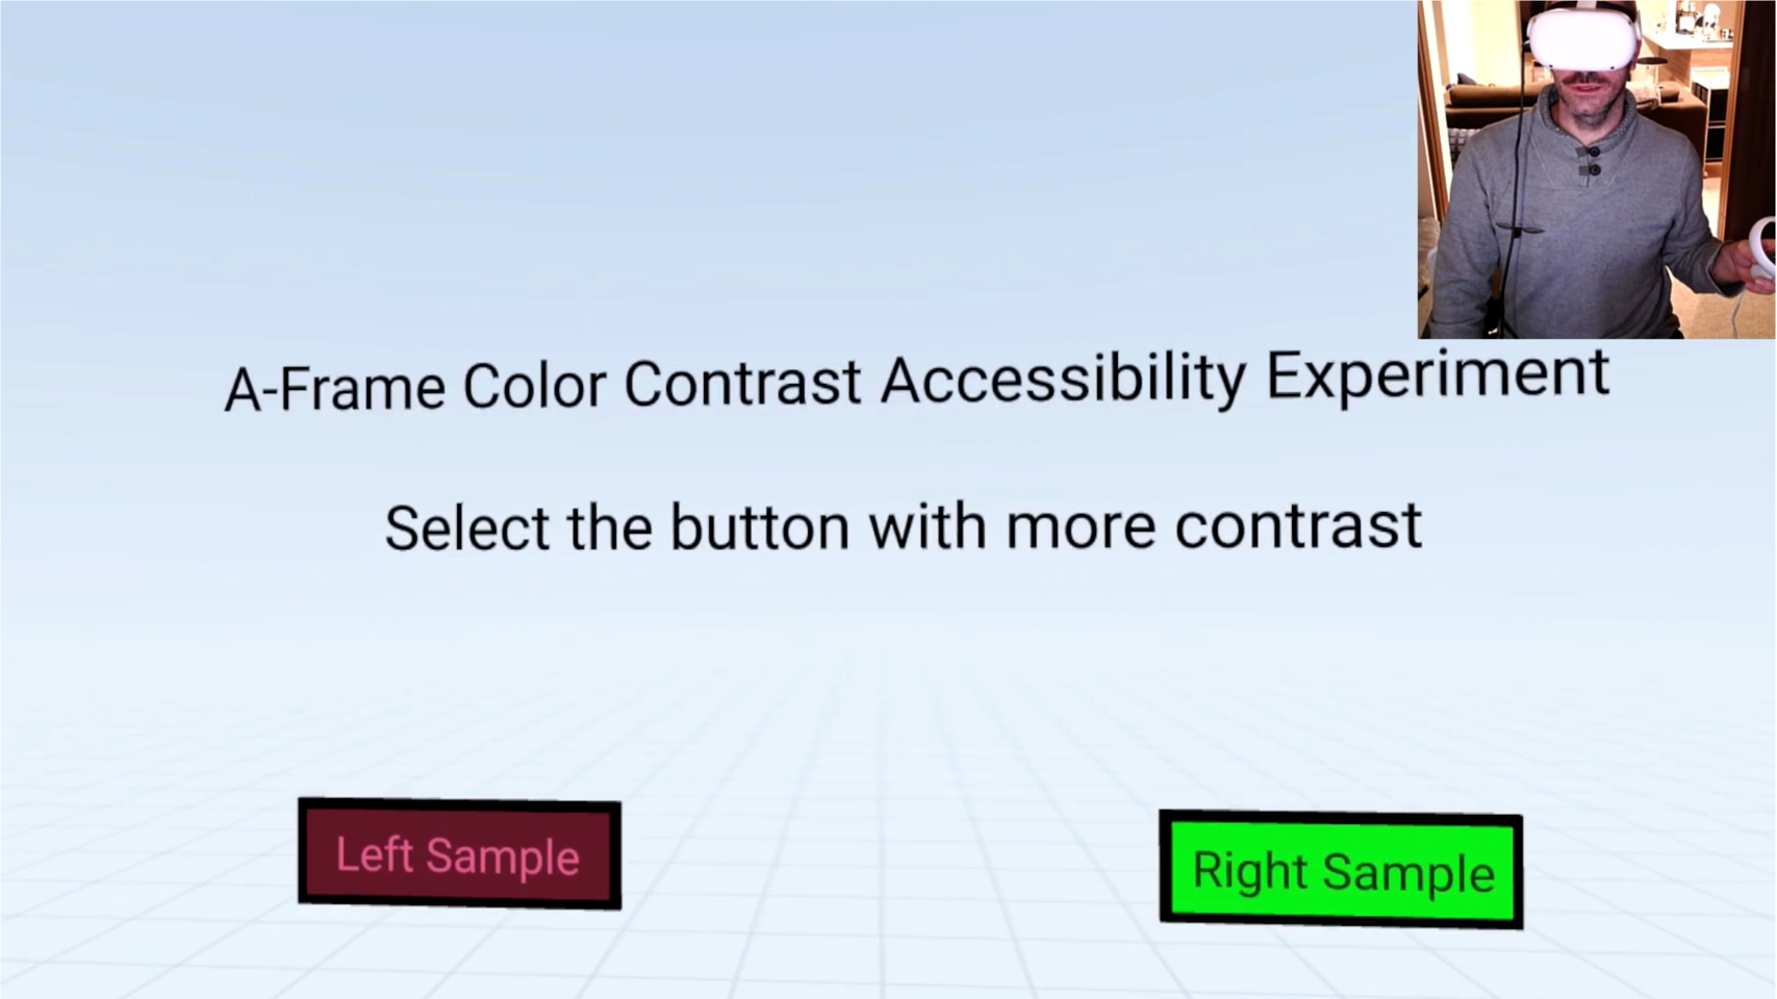 Thomas Logan wears Oculus Quest 2 Headset with A-Frame Color Contrast Accessibility Experiment WebXR page